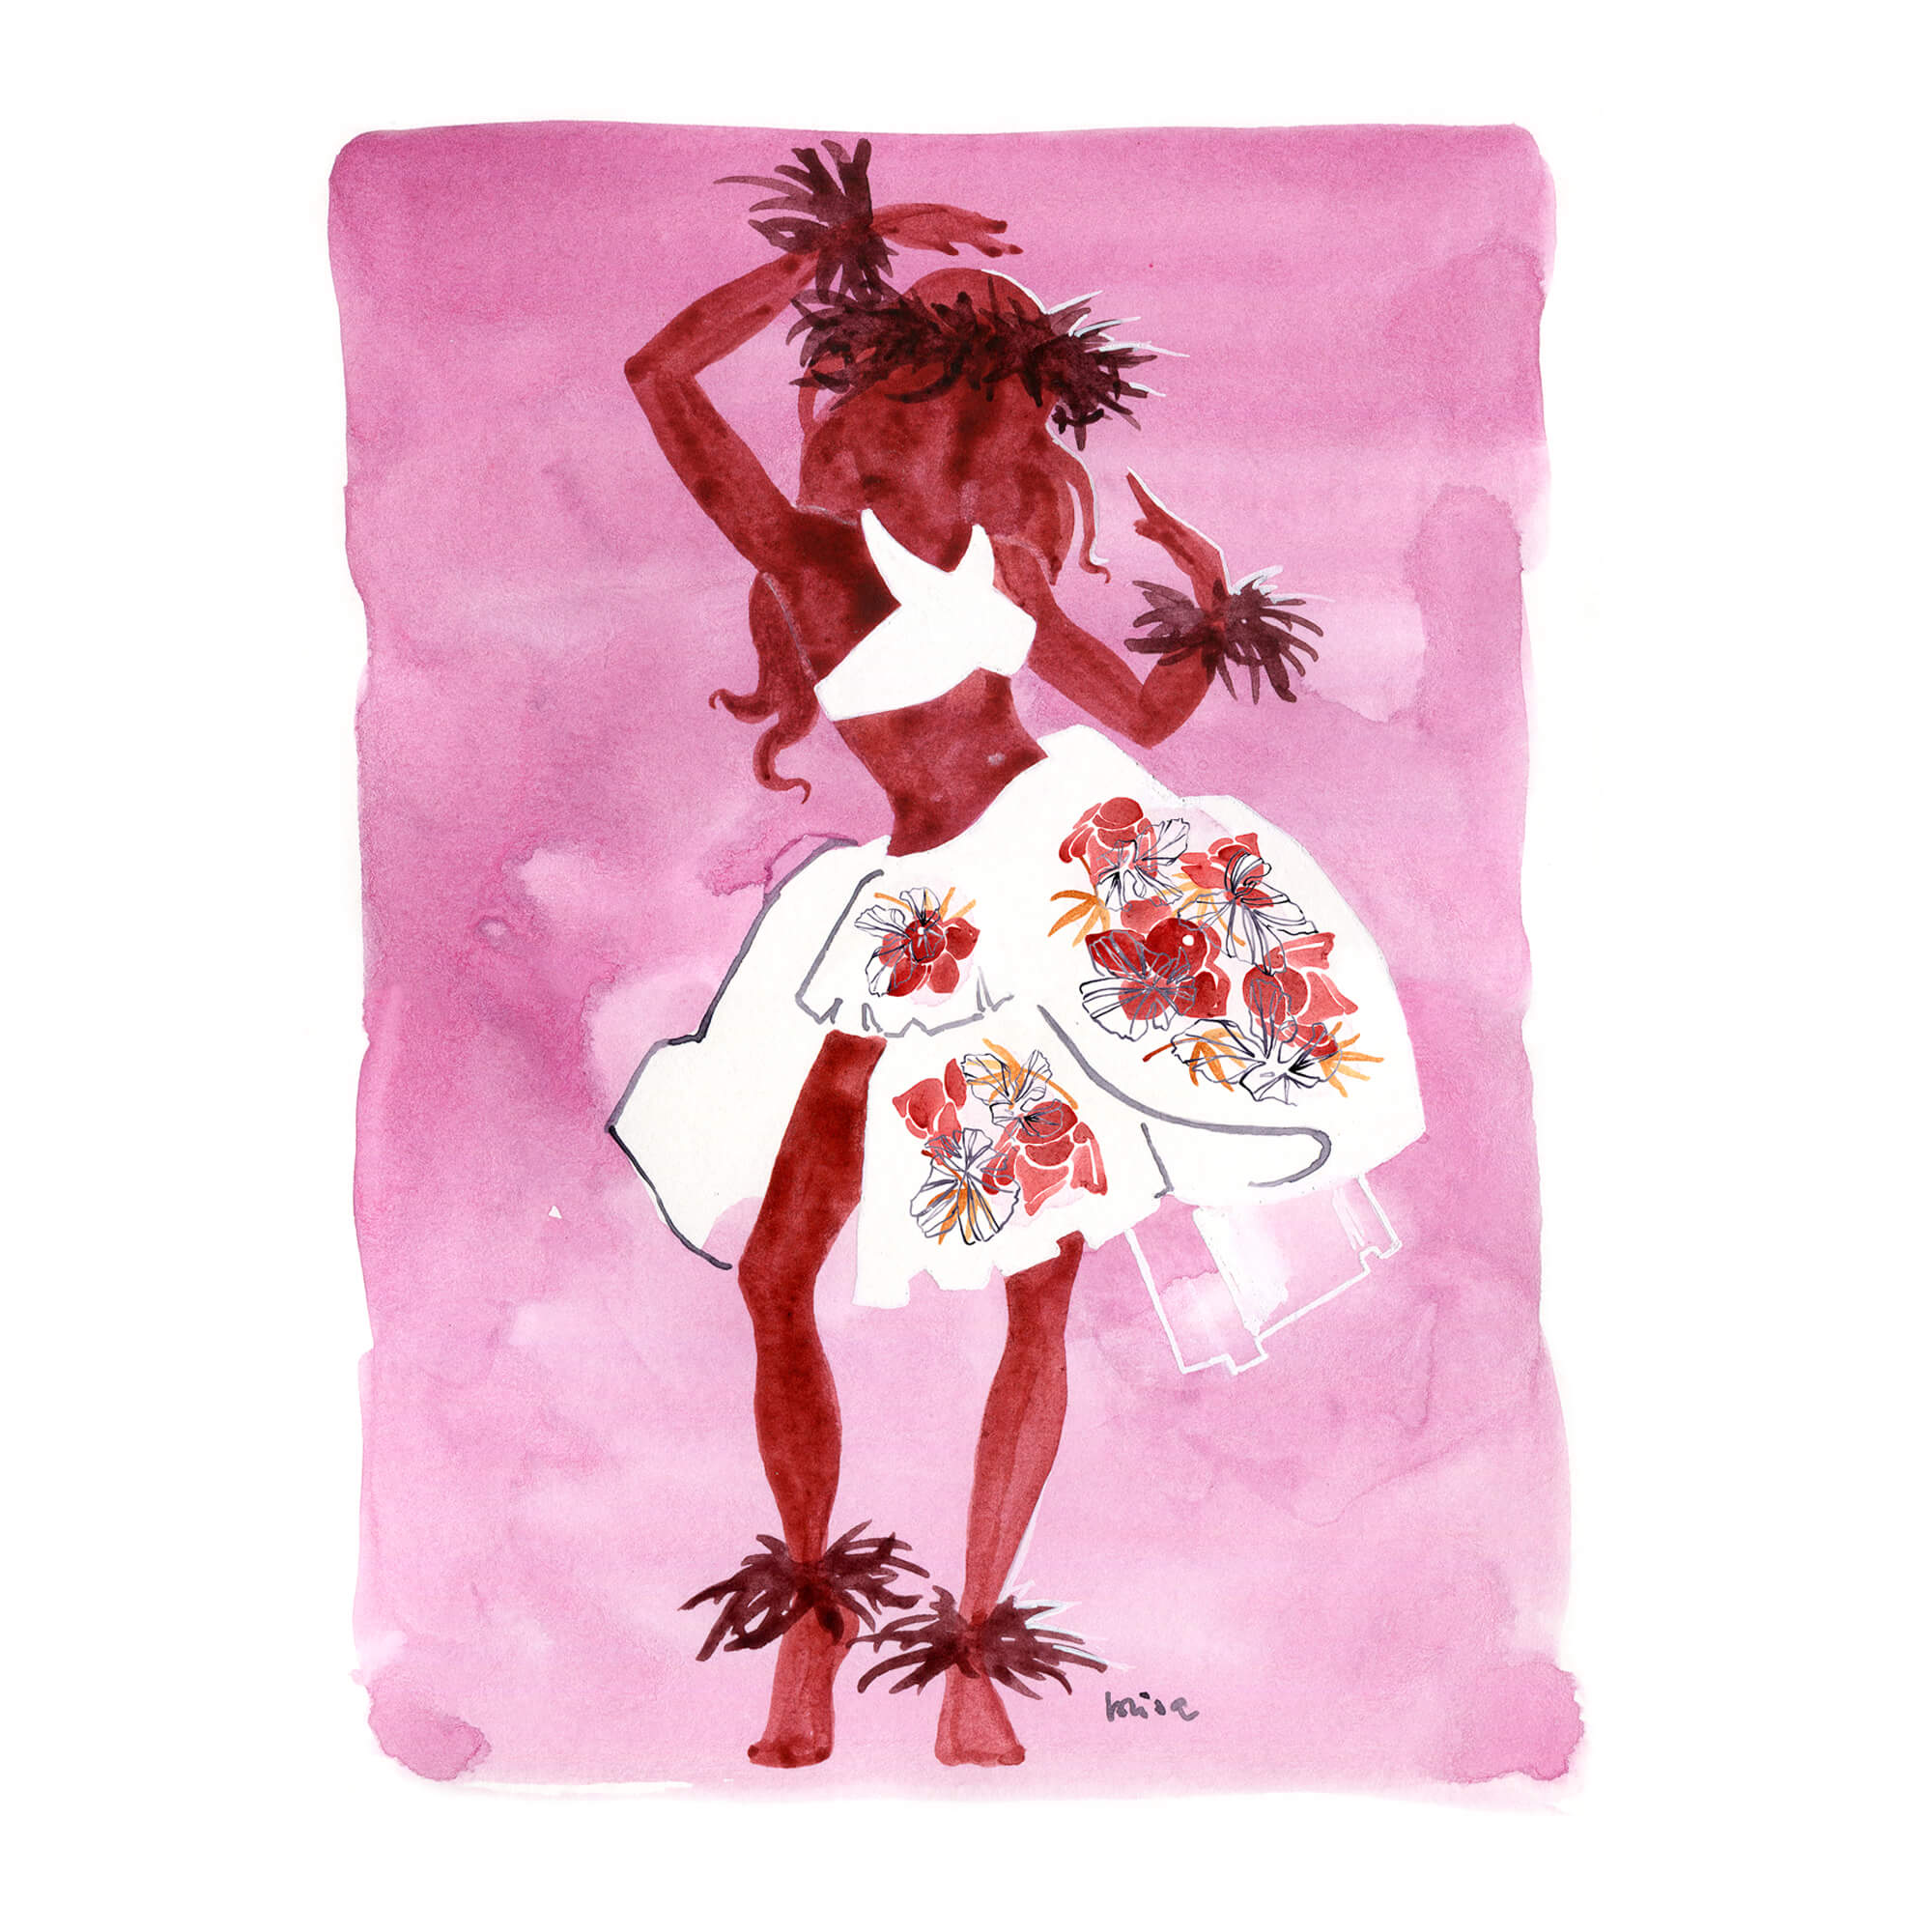 A paper giclée print of a watercolor artwork featuring a hula dancer on magenta background by Hawaii artist Lovisa Oliv